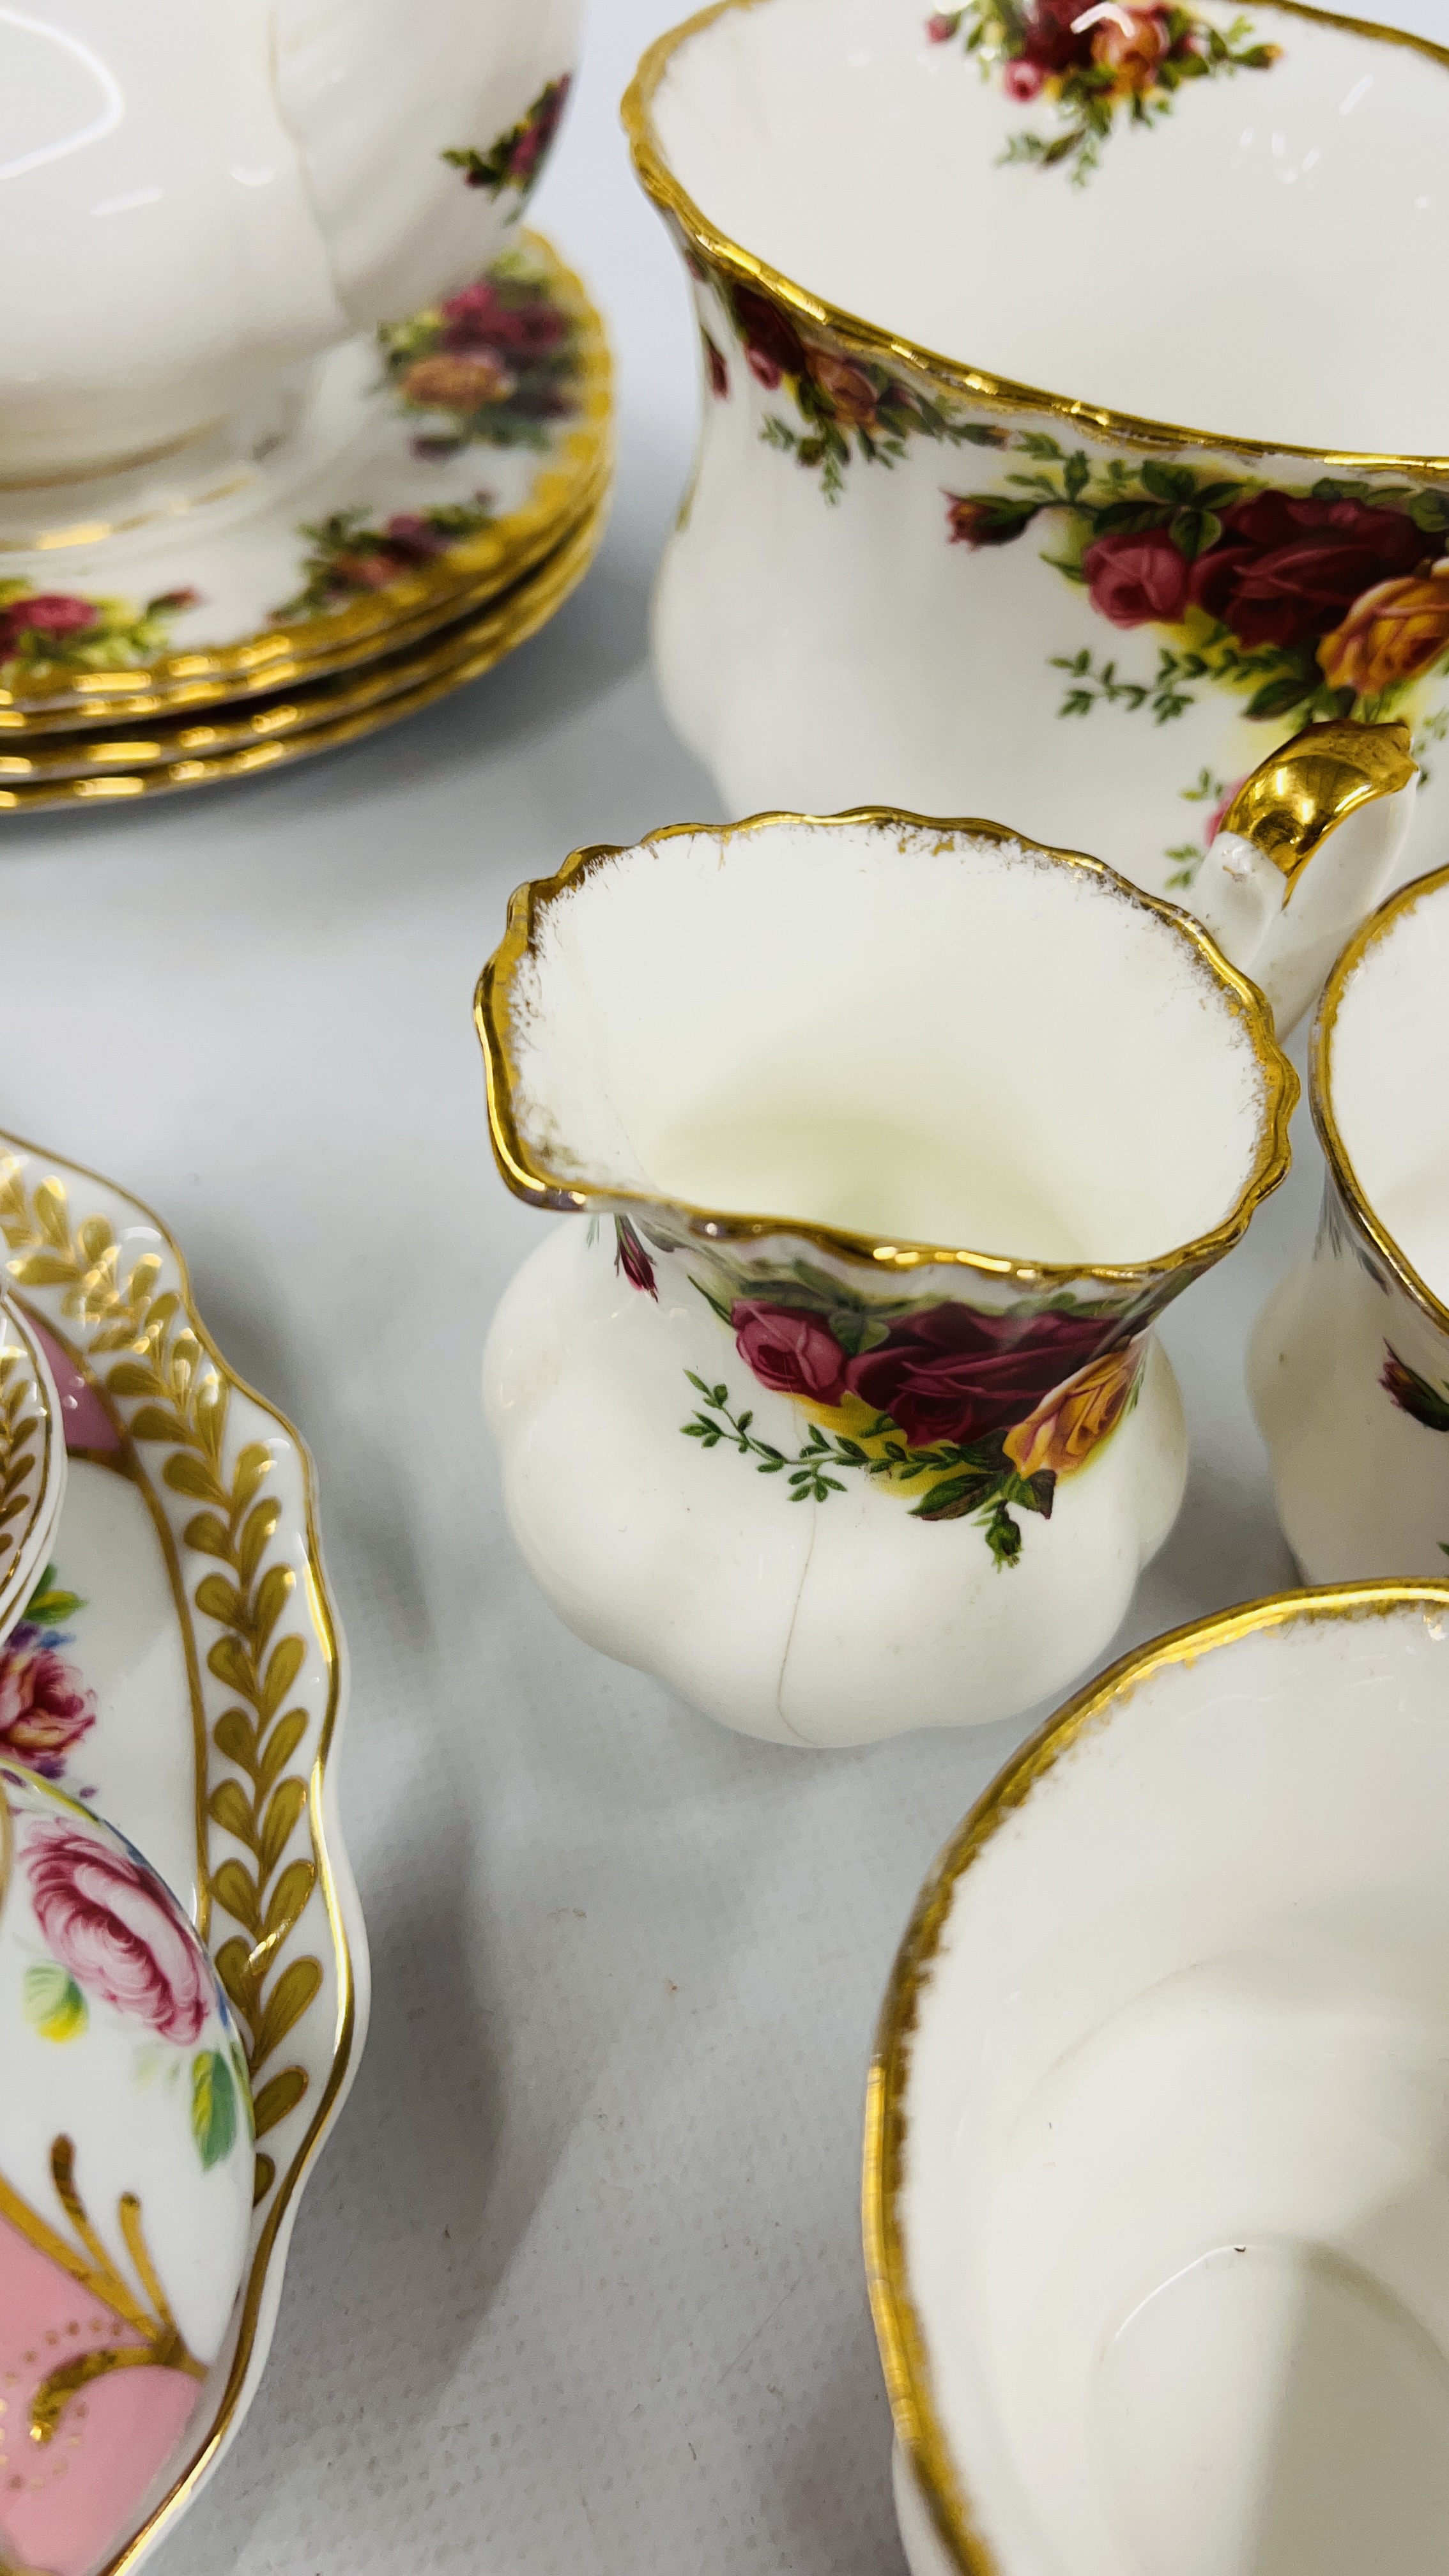 13 PIECES OF ROYAL ALBERT OLD COUNTRY ROSE TEA WARE, - Image 9 of 9